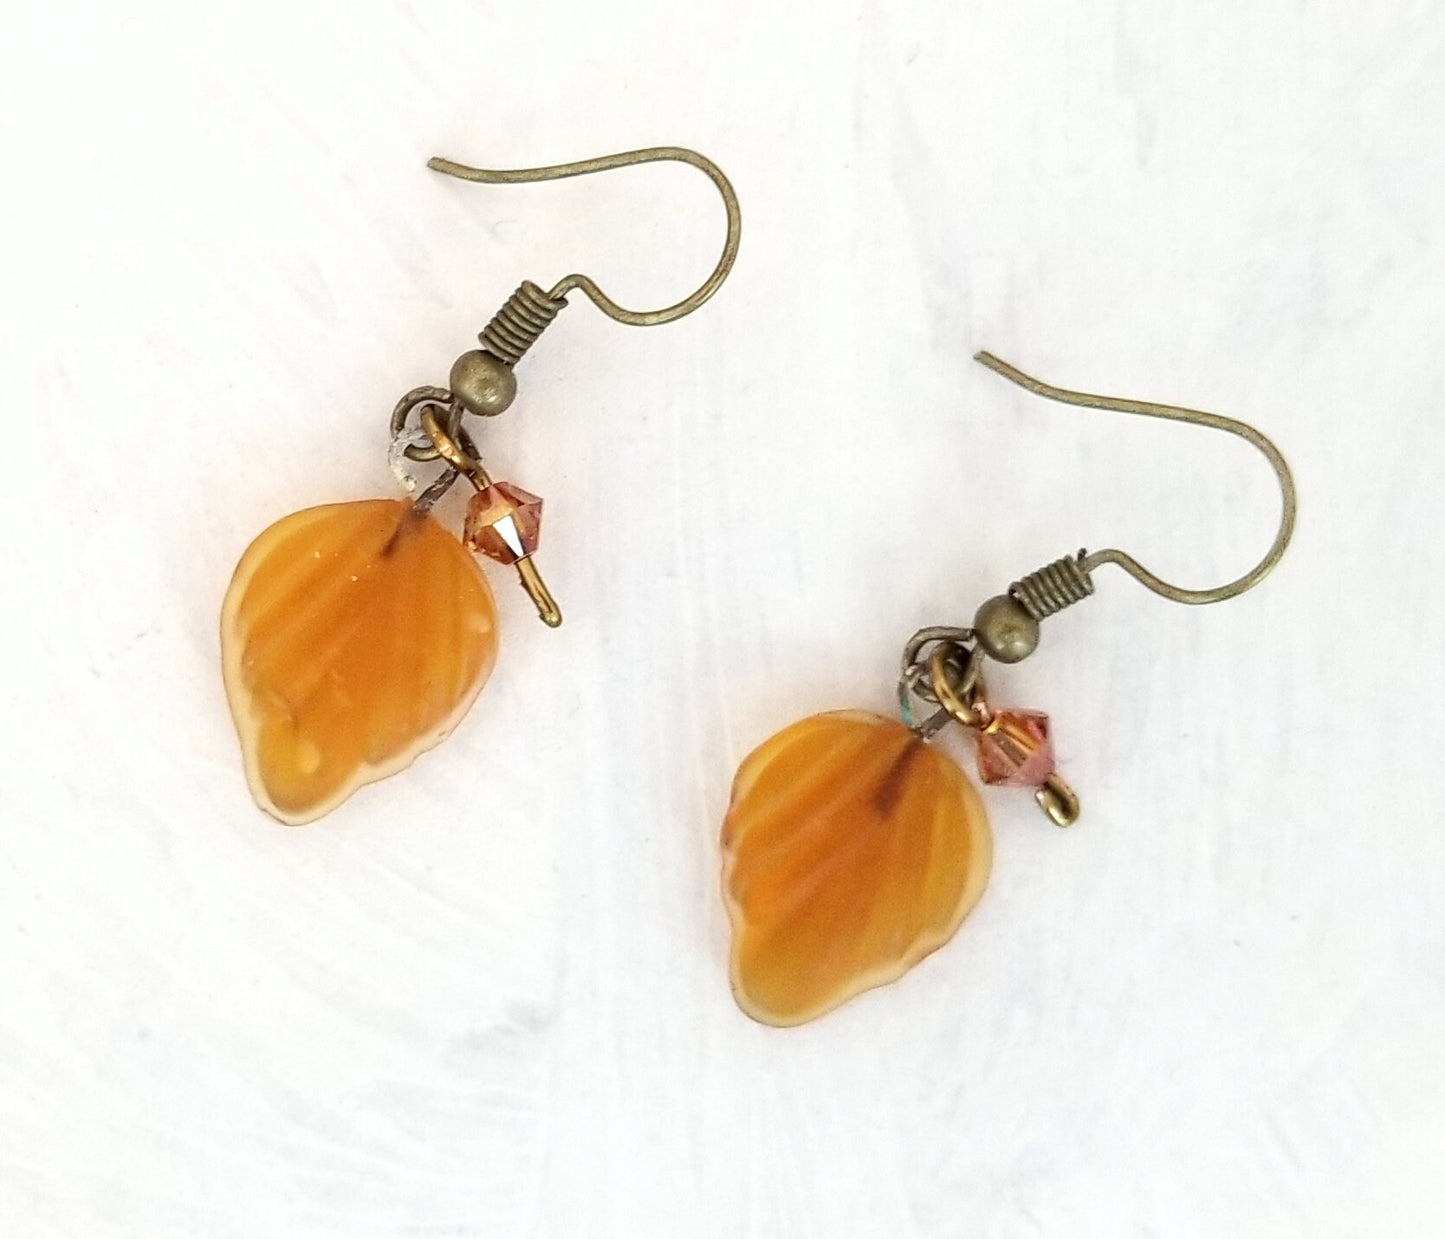 Small Glass Leaf Earrings in Frosted Light Brown, Wedding, Bridesmaid, Art Nouveau, Renaissance, Forest, Choice of Closure Types